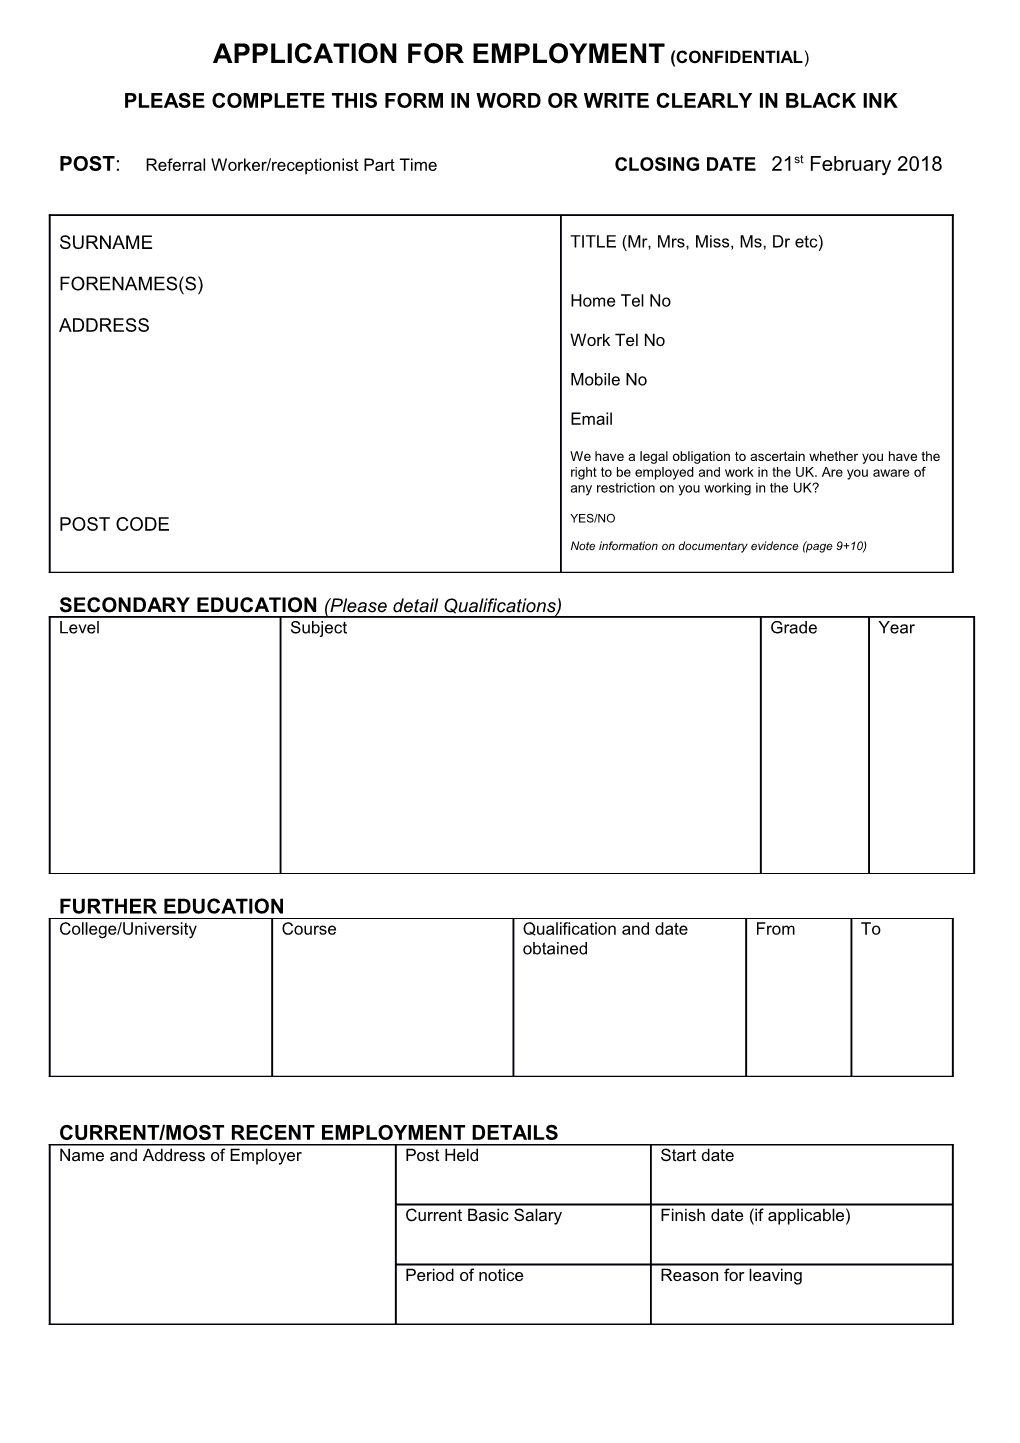 Please Complete This Form in Word Or Write Clearly in Black Ink